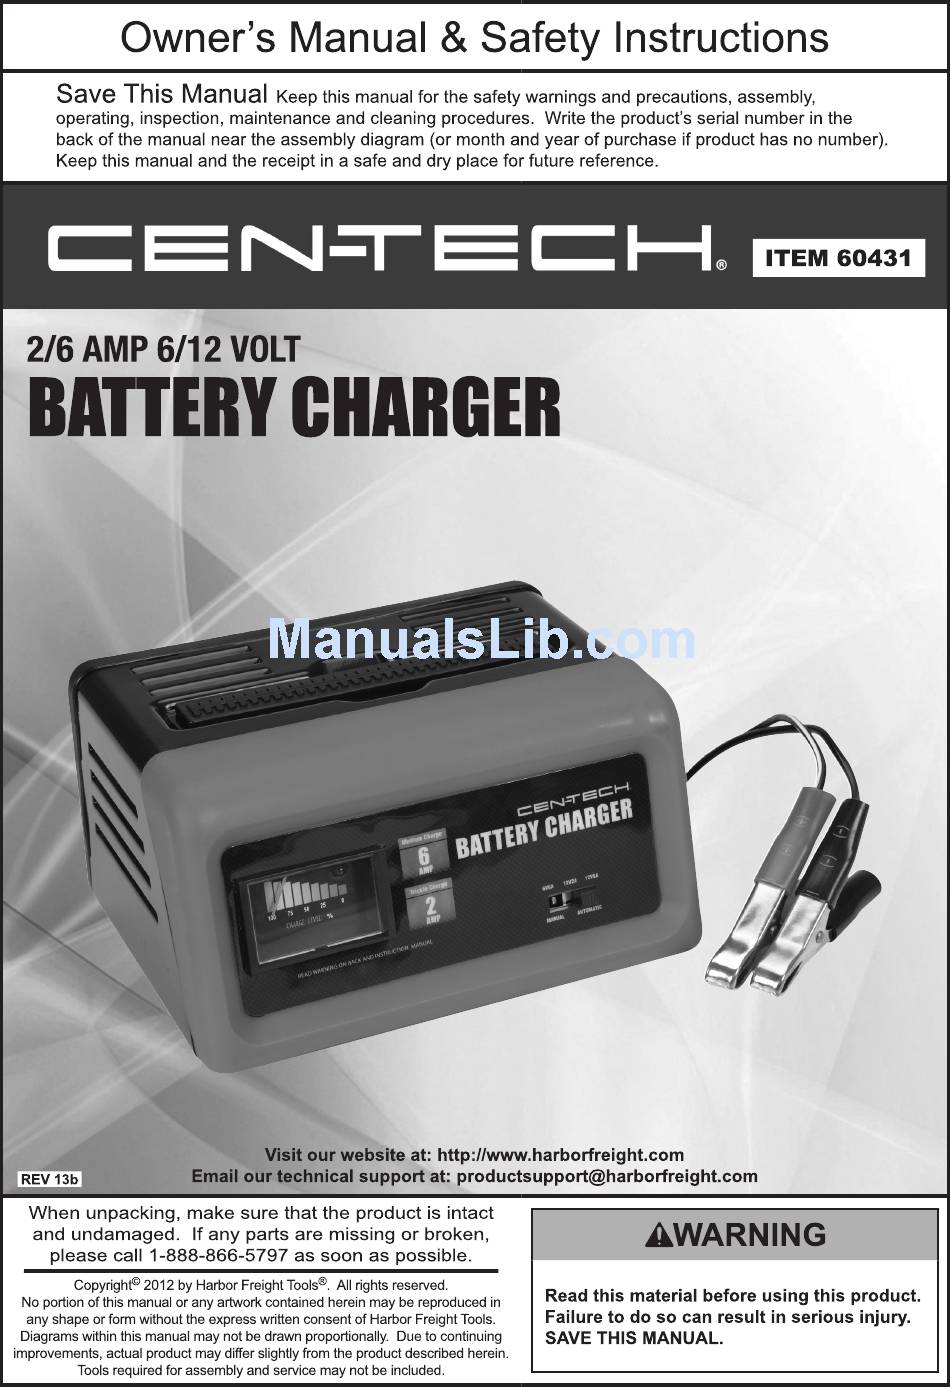 CEN-TECH 60431 OWNER'S MANUAL & SAFETY INSTRUCTIONS Pdf Download ...